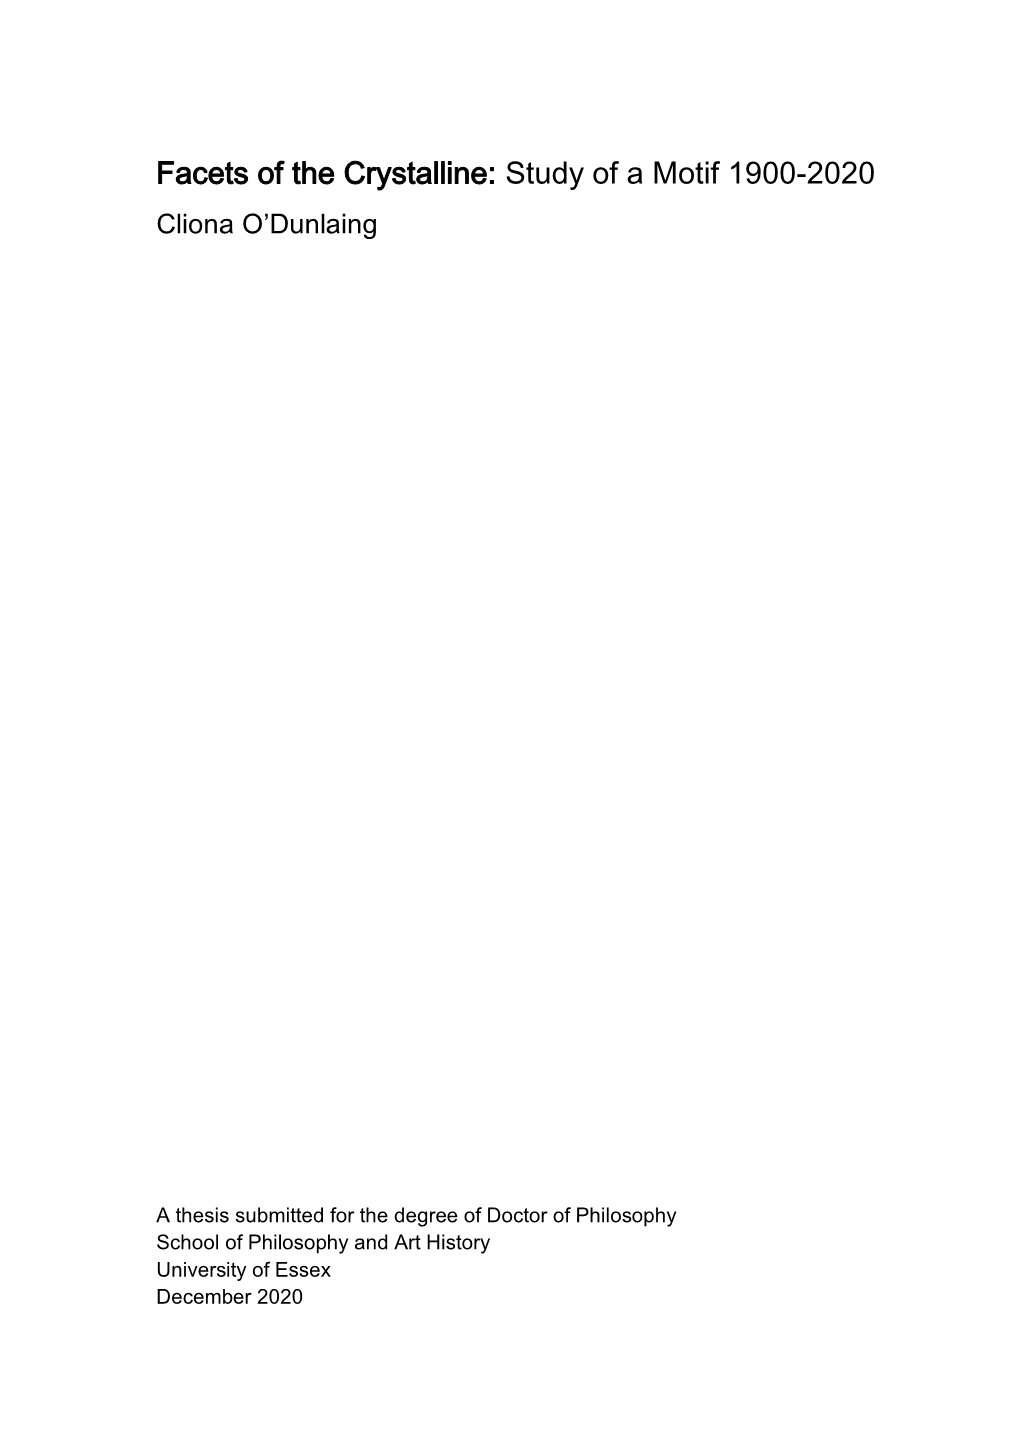 Facets of the Crystalline: Study of a Motif 1900-2020 Cliona O’Dunlaing